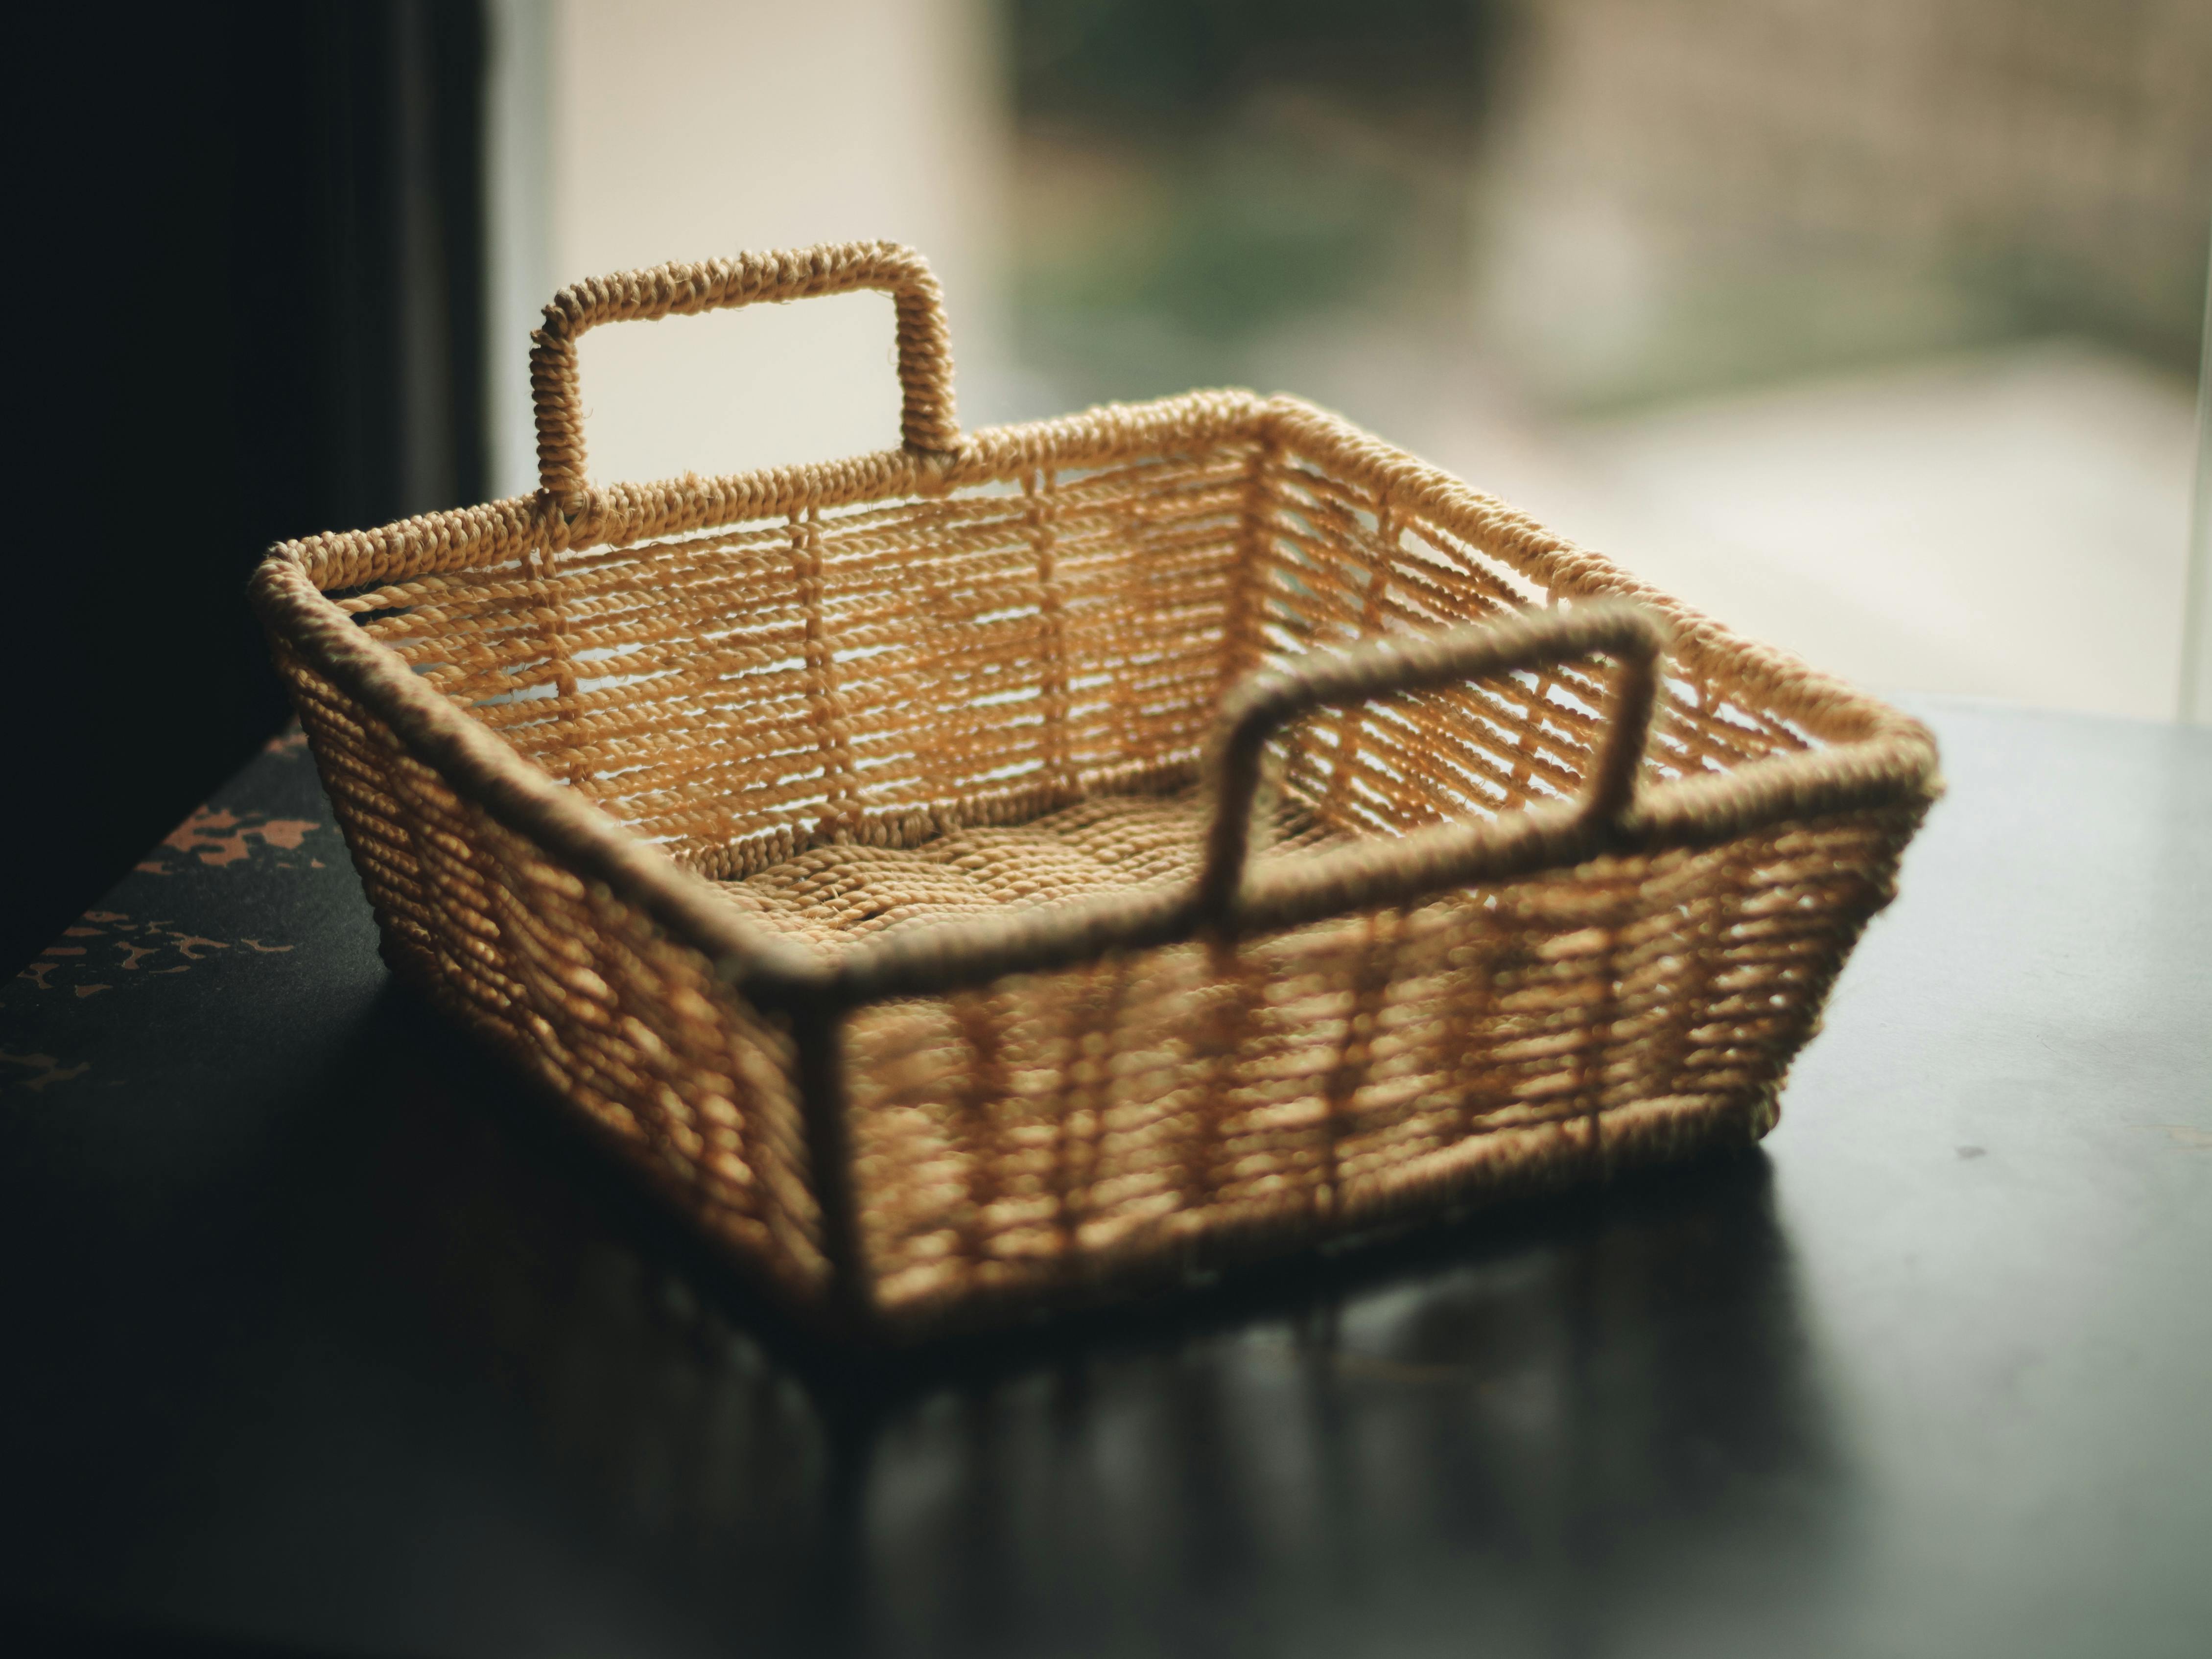 square brown wicker basket on table